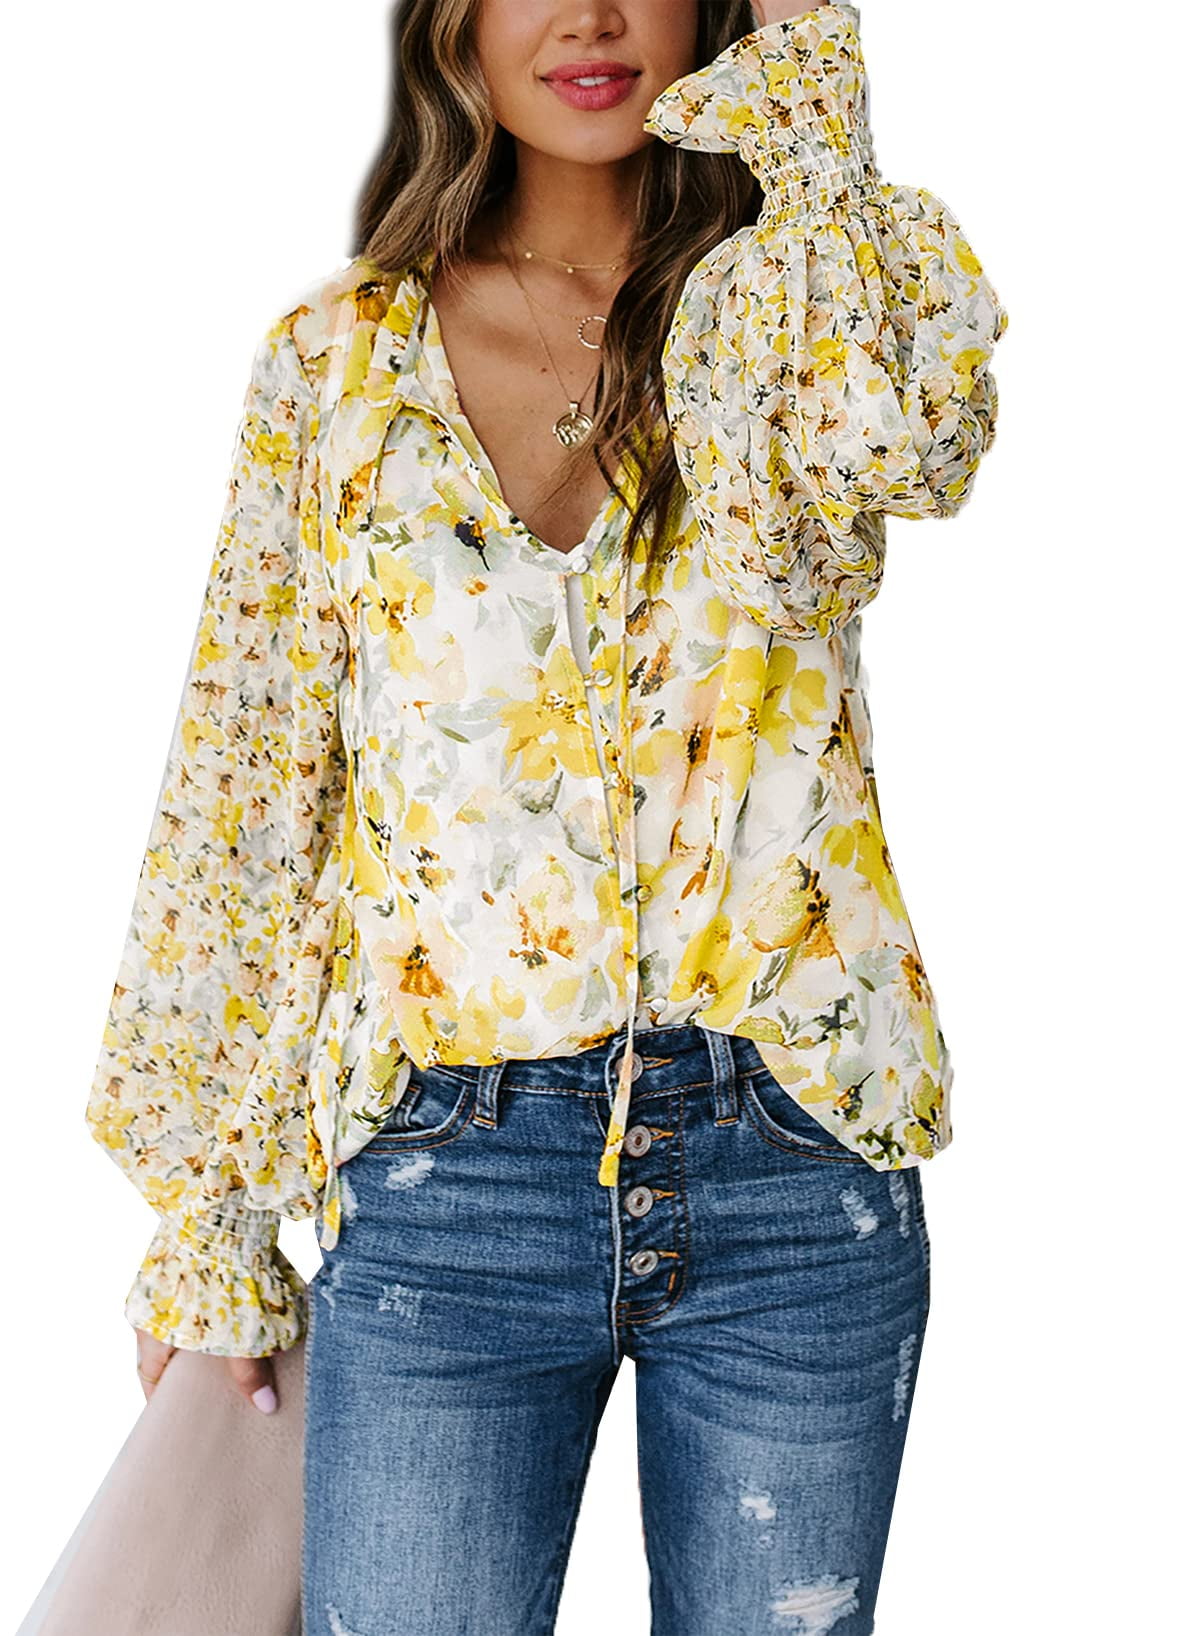 Dearlove Boho Shirts for Women Floral Print V Neck Blouses Casual Puff ...